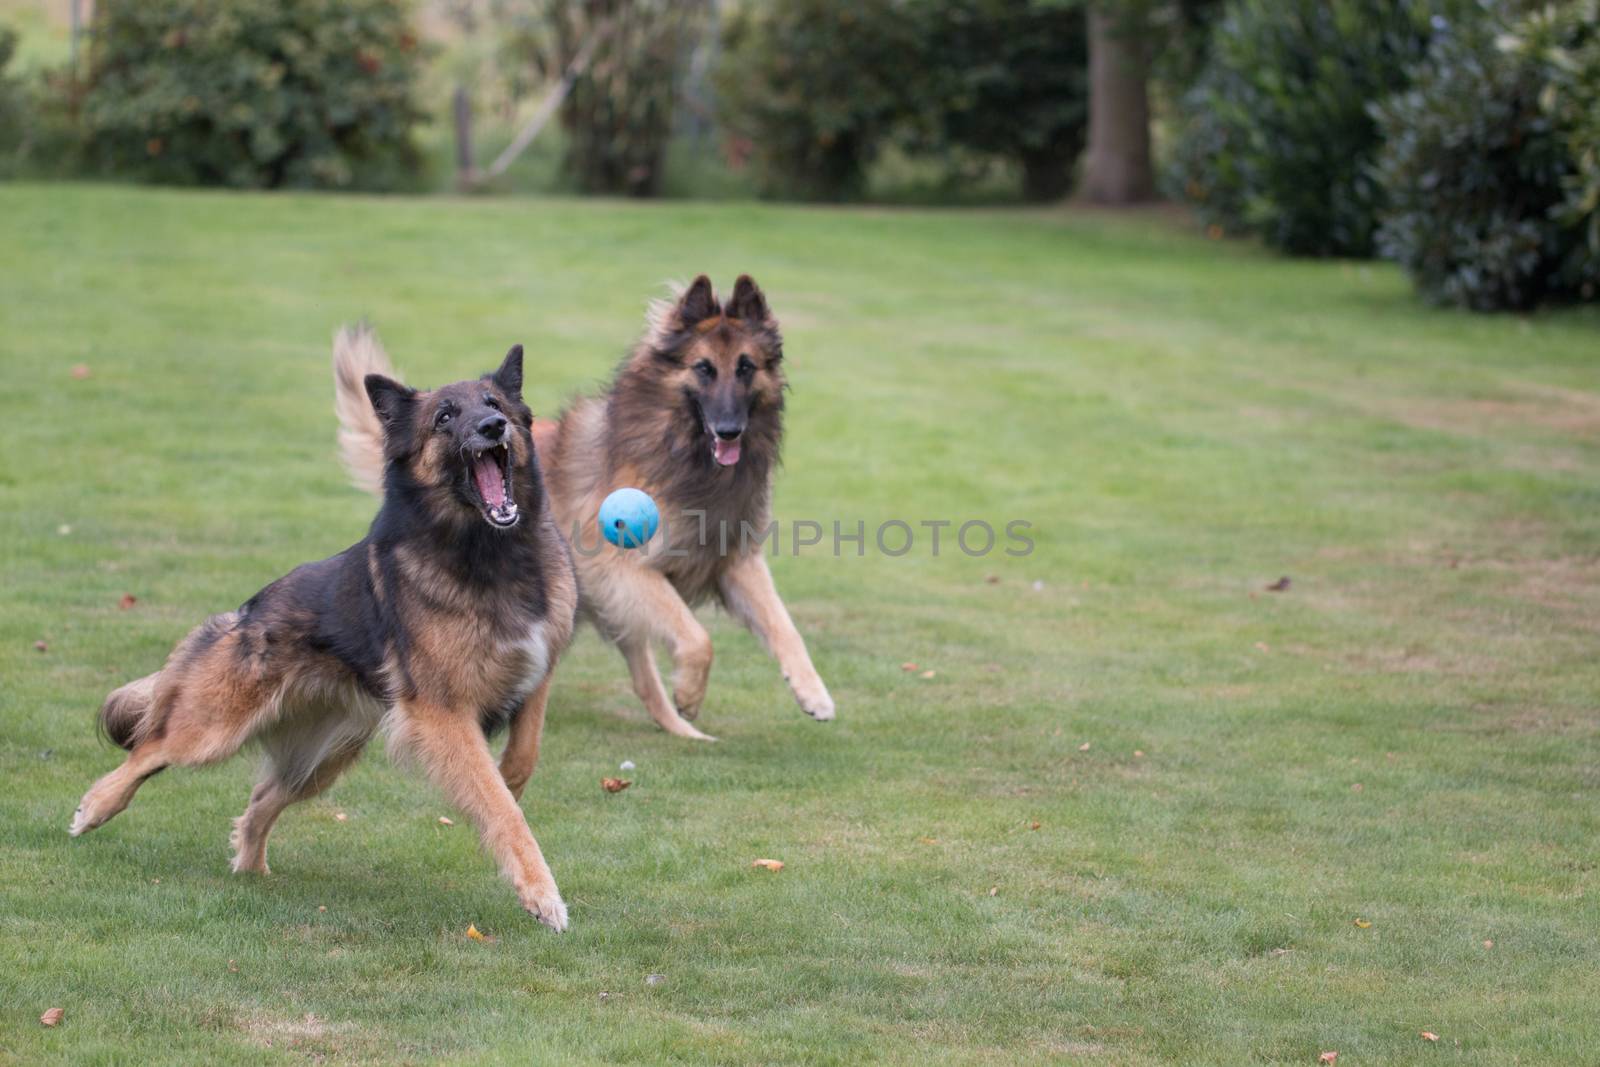 Two dogs running after ball in grass